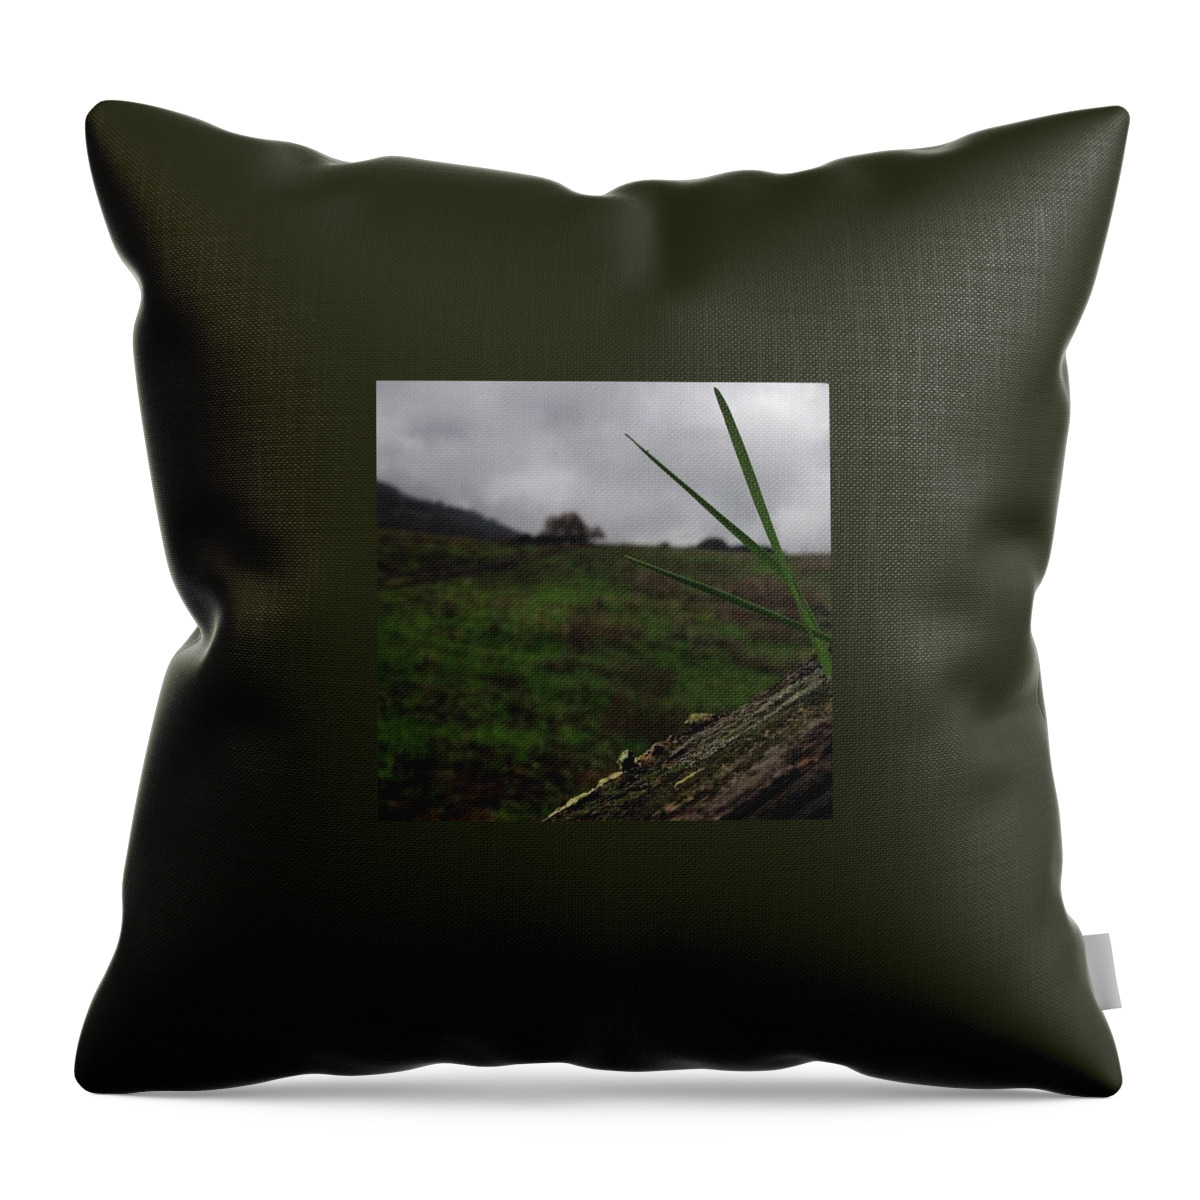 Gloomy Throw Pillow featuring the photograph Grass Growing Out Of A Fence Post by Alison Photography